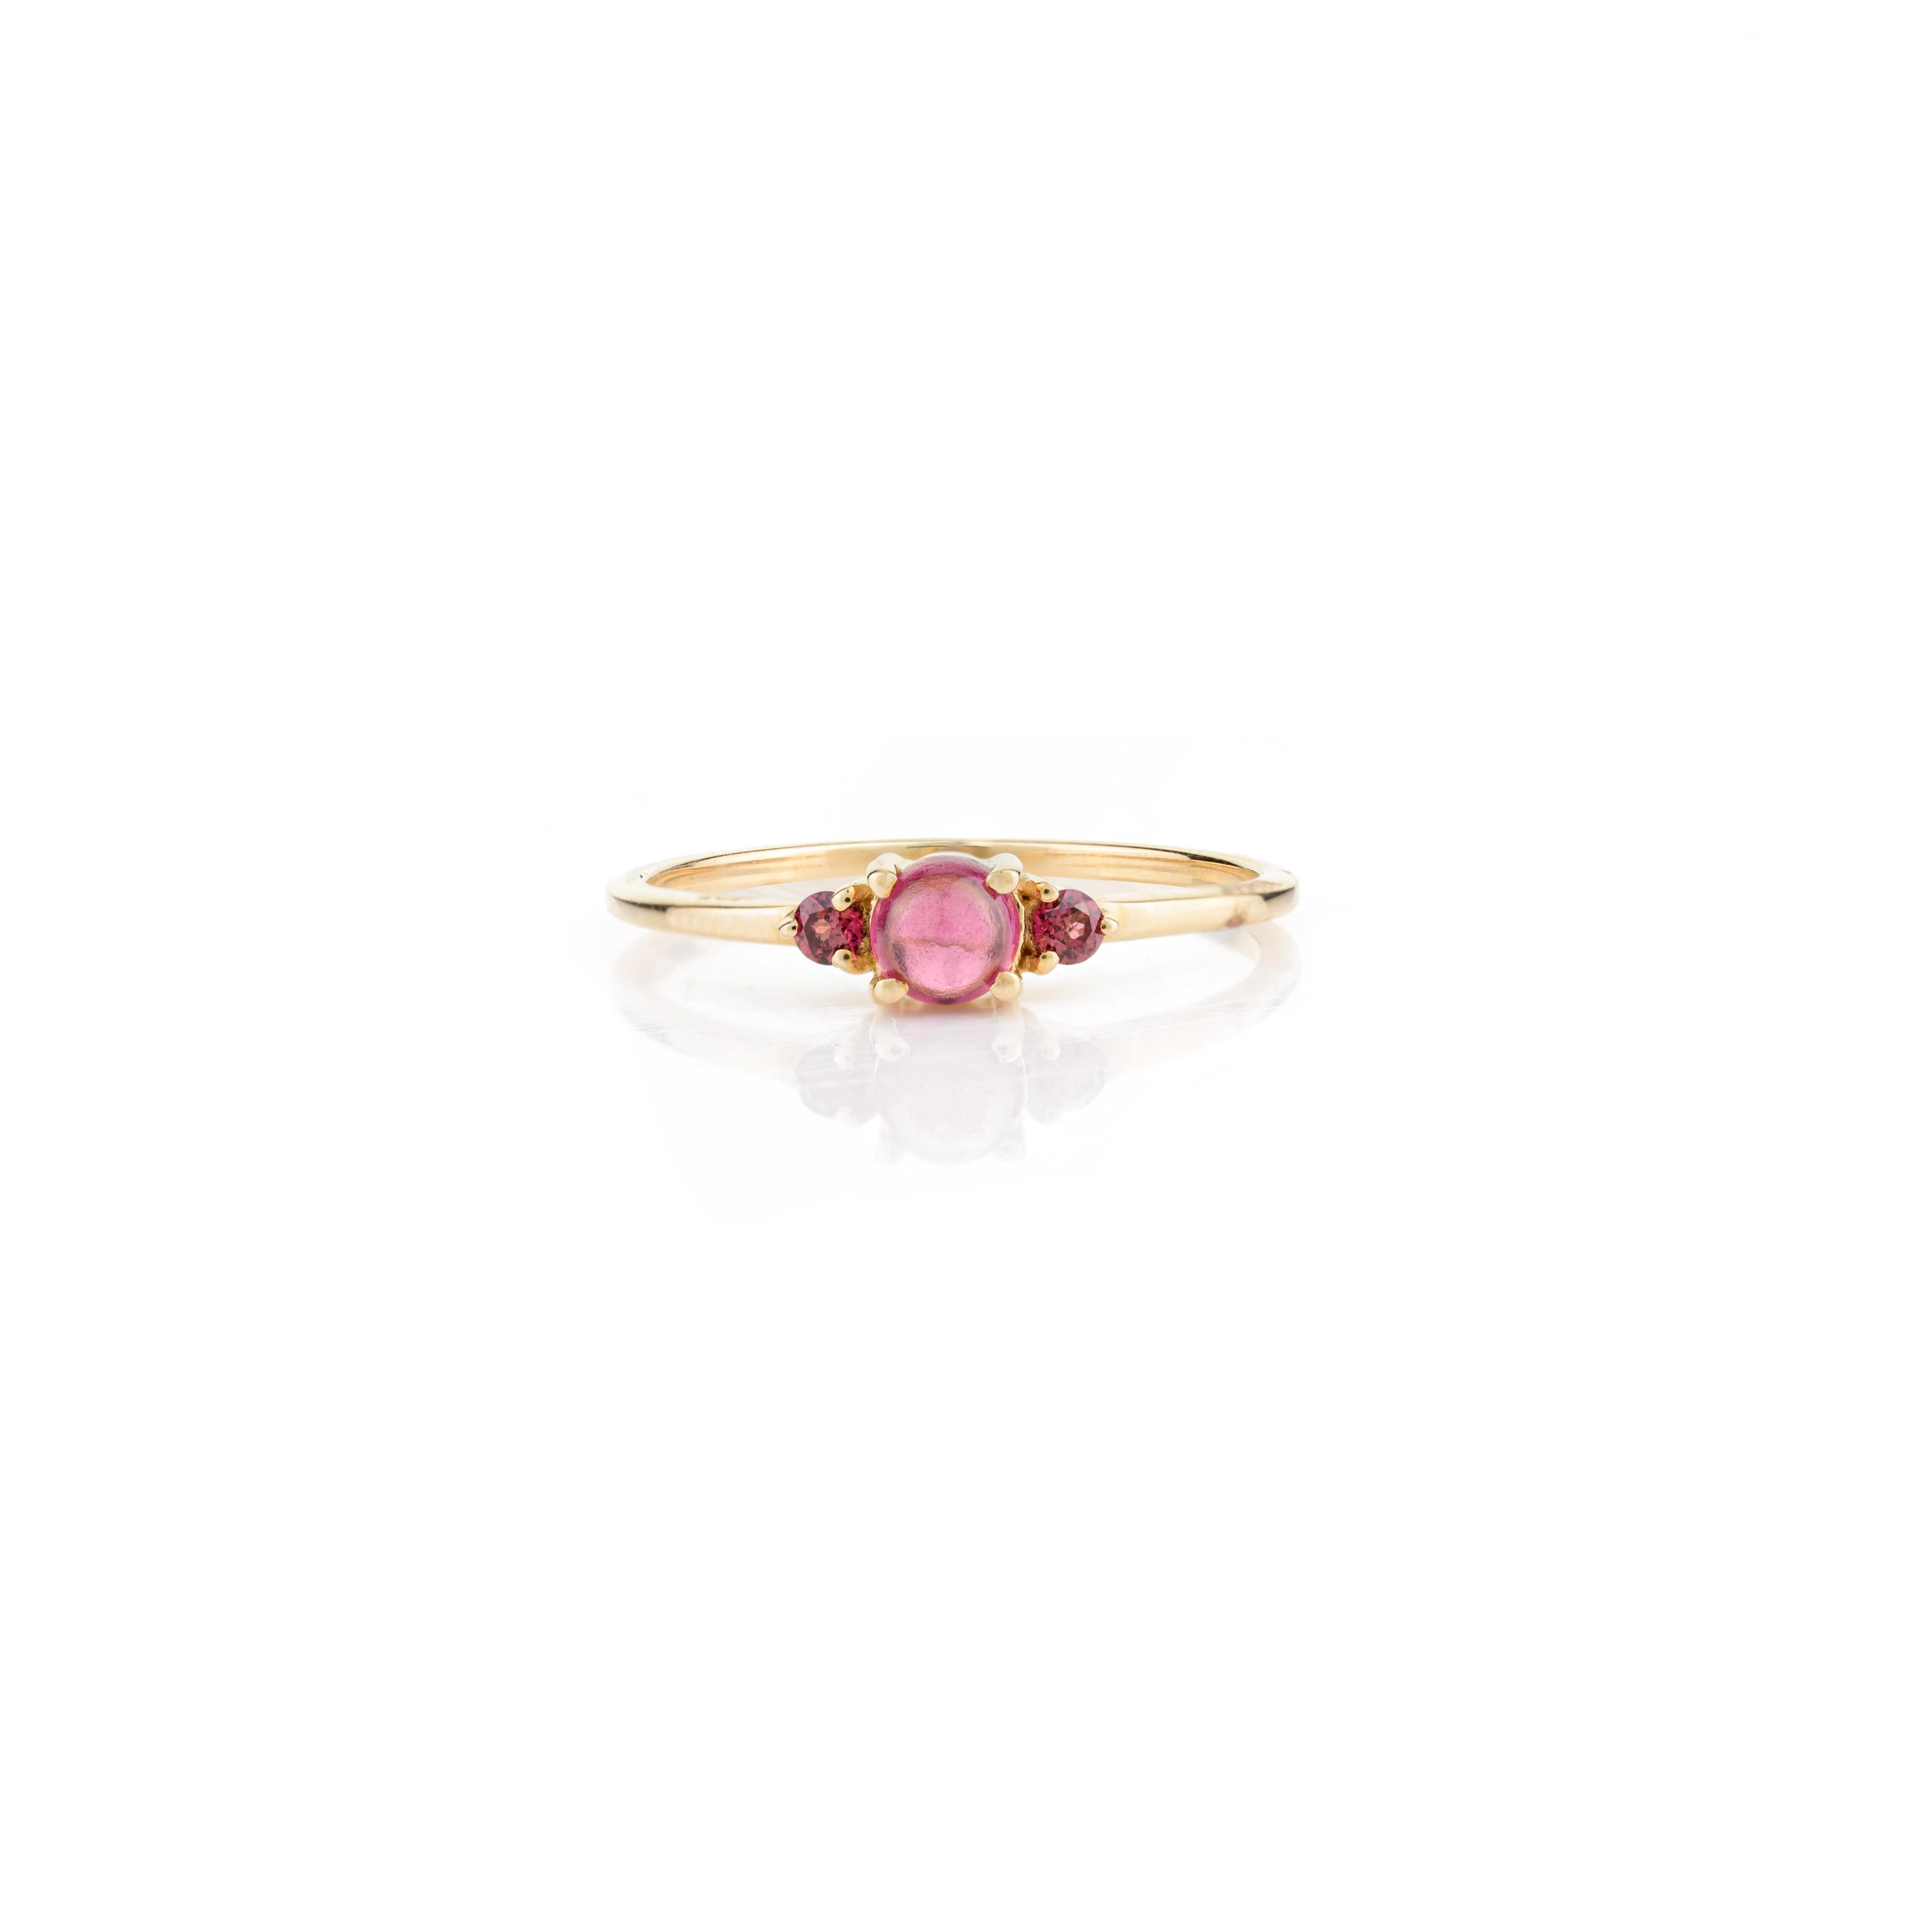 For Sale:  Dainty Three Stone Garnet Ring 14k Solid Yellow Gold Promise Ring for Her 7